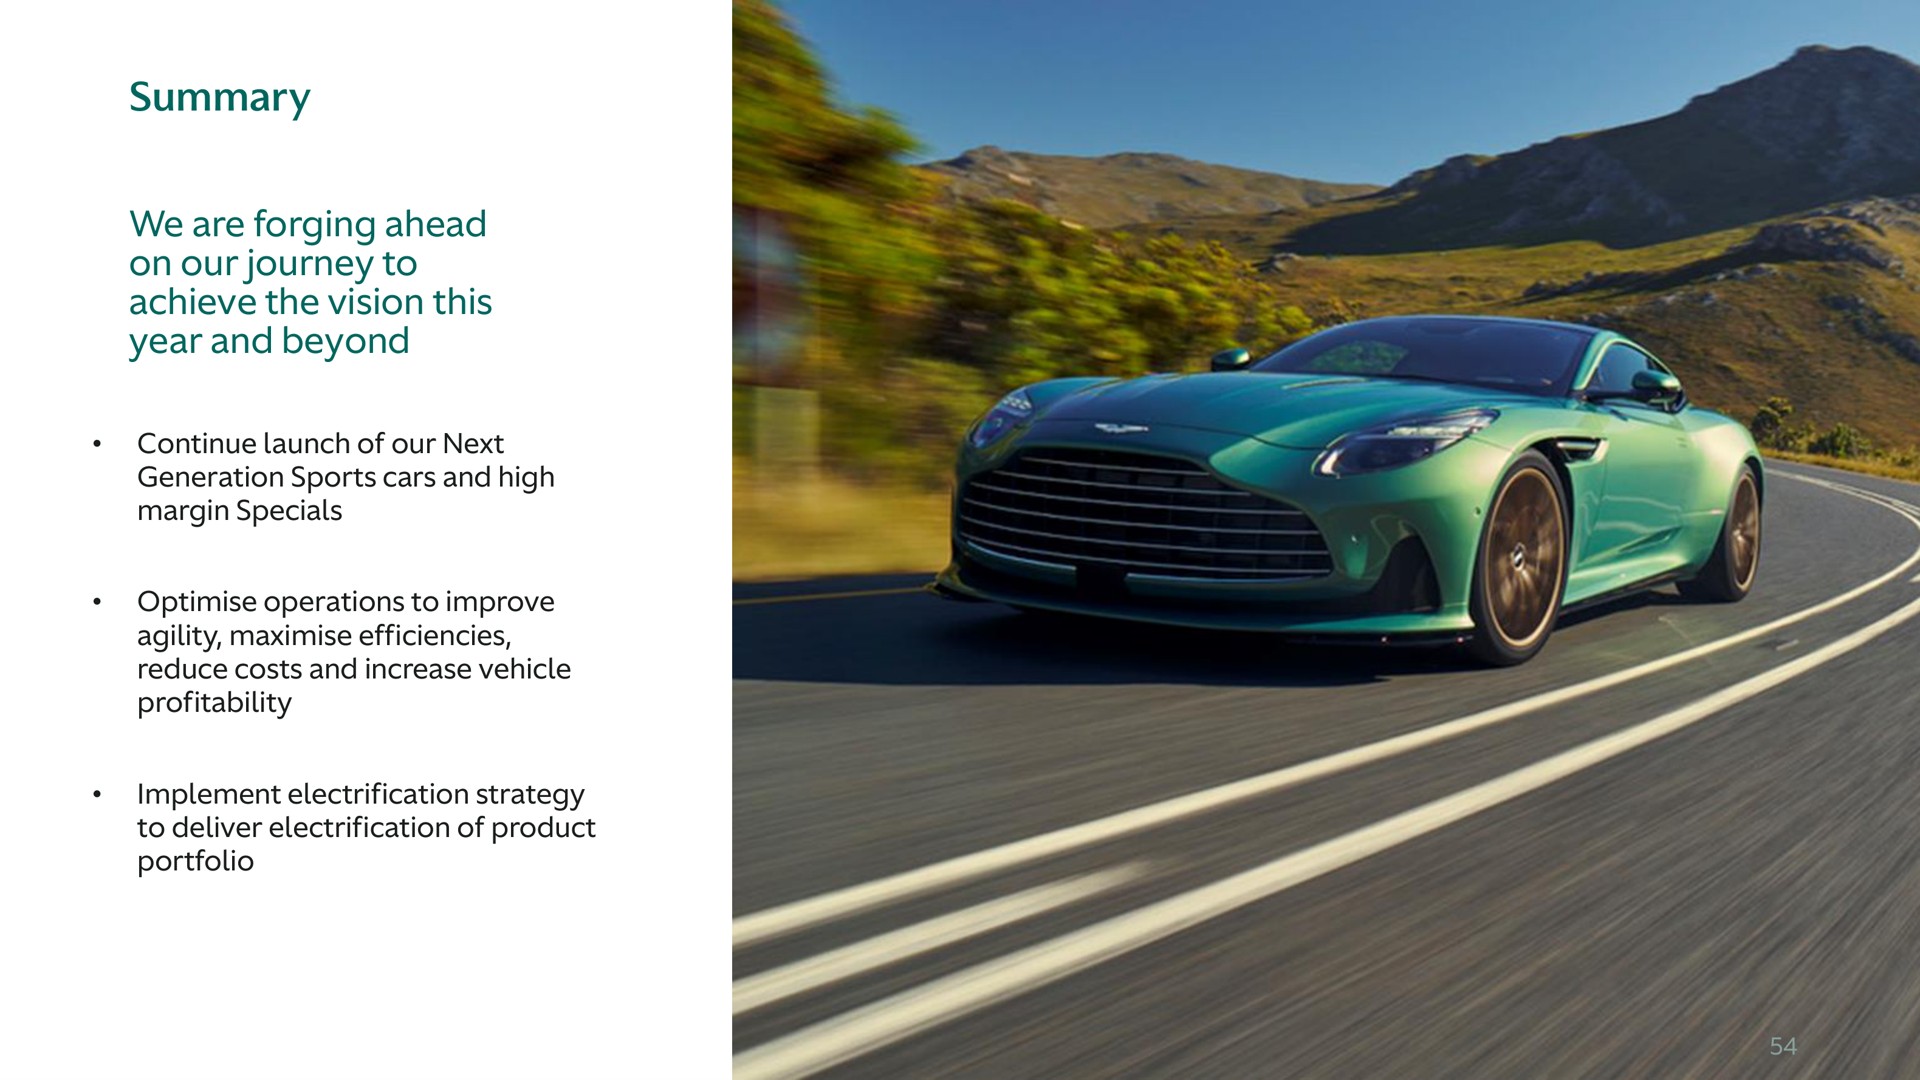 summary we are forging ahead on our journey to achieve the vision this year and beyond | Aston Martin Lagonda